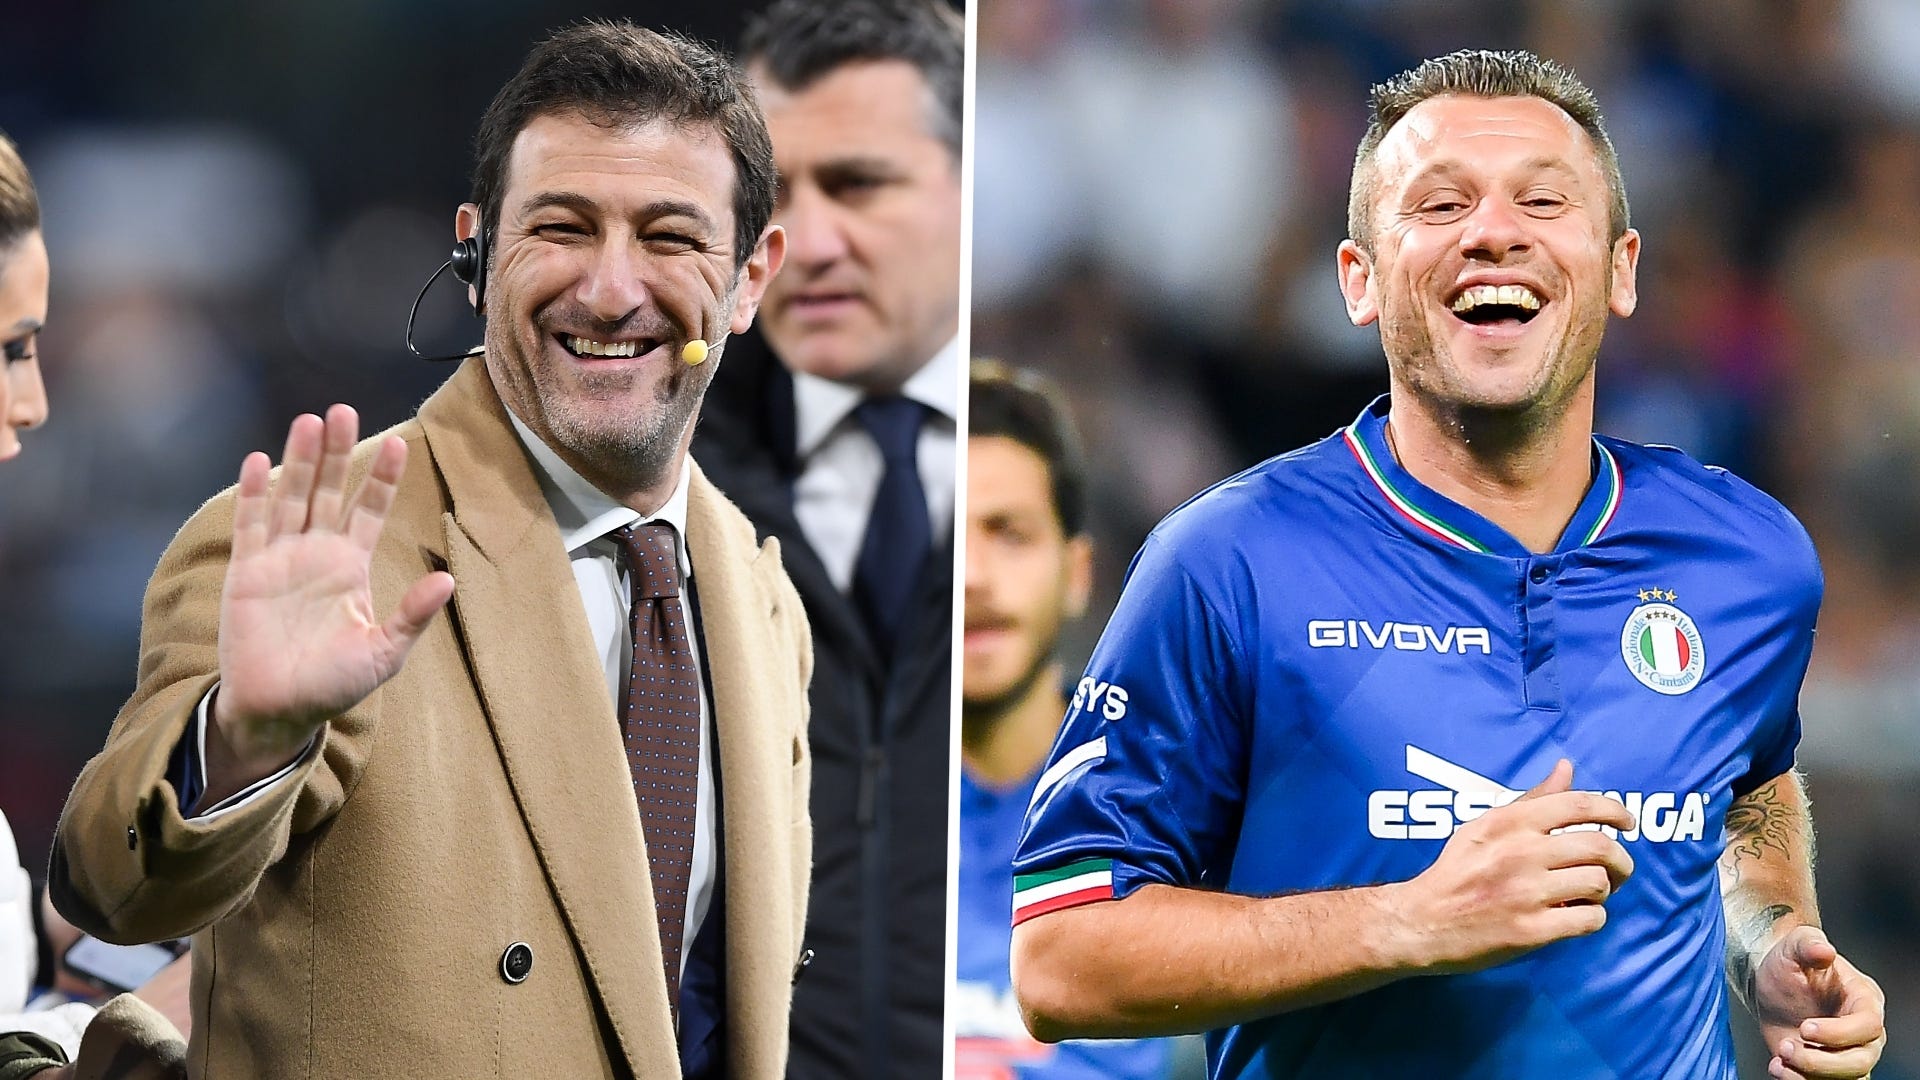 'He talks bullsh*t every day!' - Cassano ripped apart by Napoli legends days after his controversial Ronaldo 'retirement' claim | Goal.com India